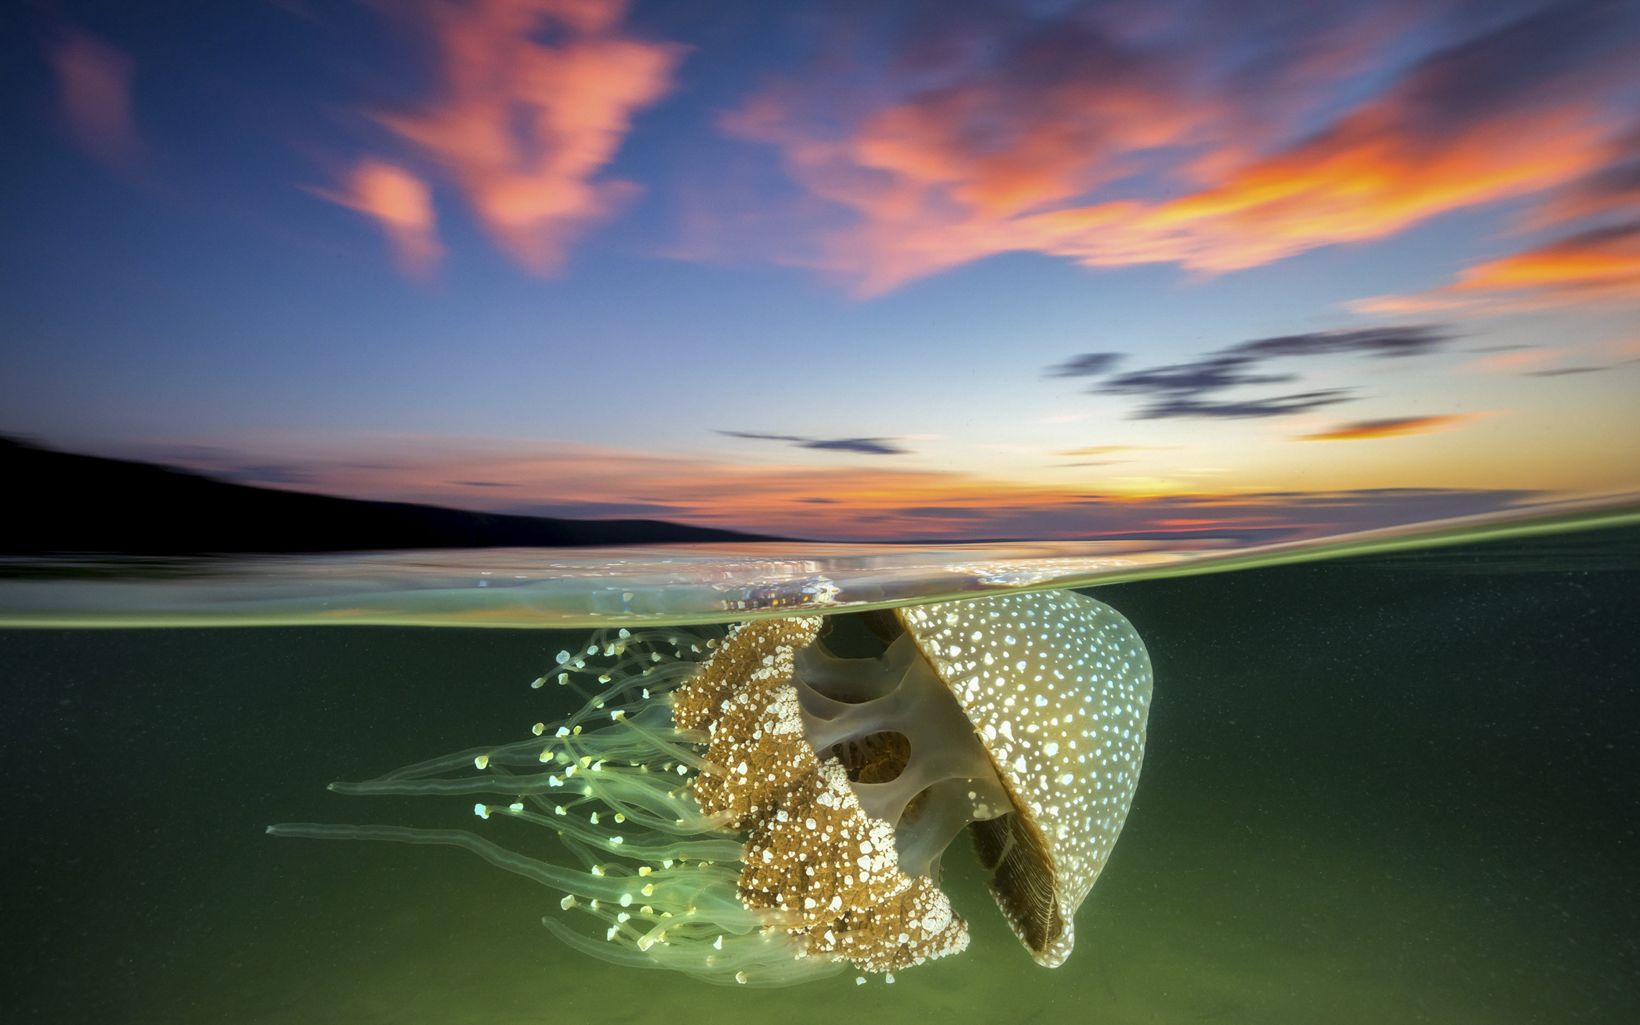 Going with the flow A White Spotted Jellyfish drifts effortlessly in the current as the sun sets over Jervis Bay. © Jordan Robins